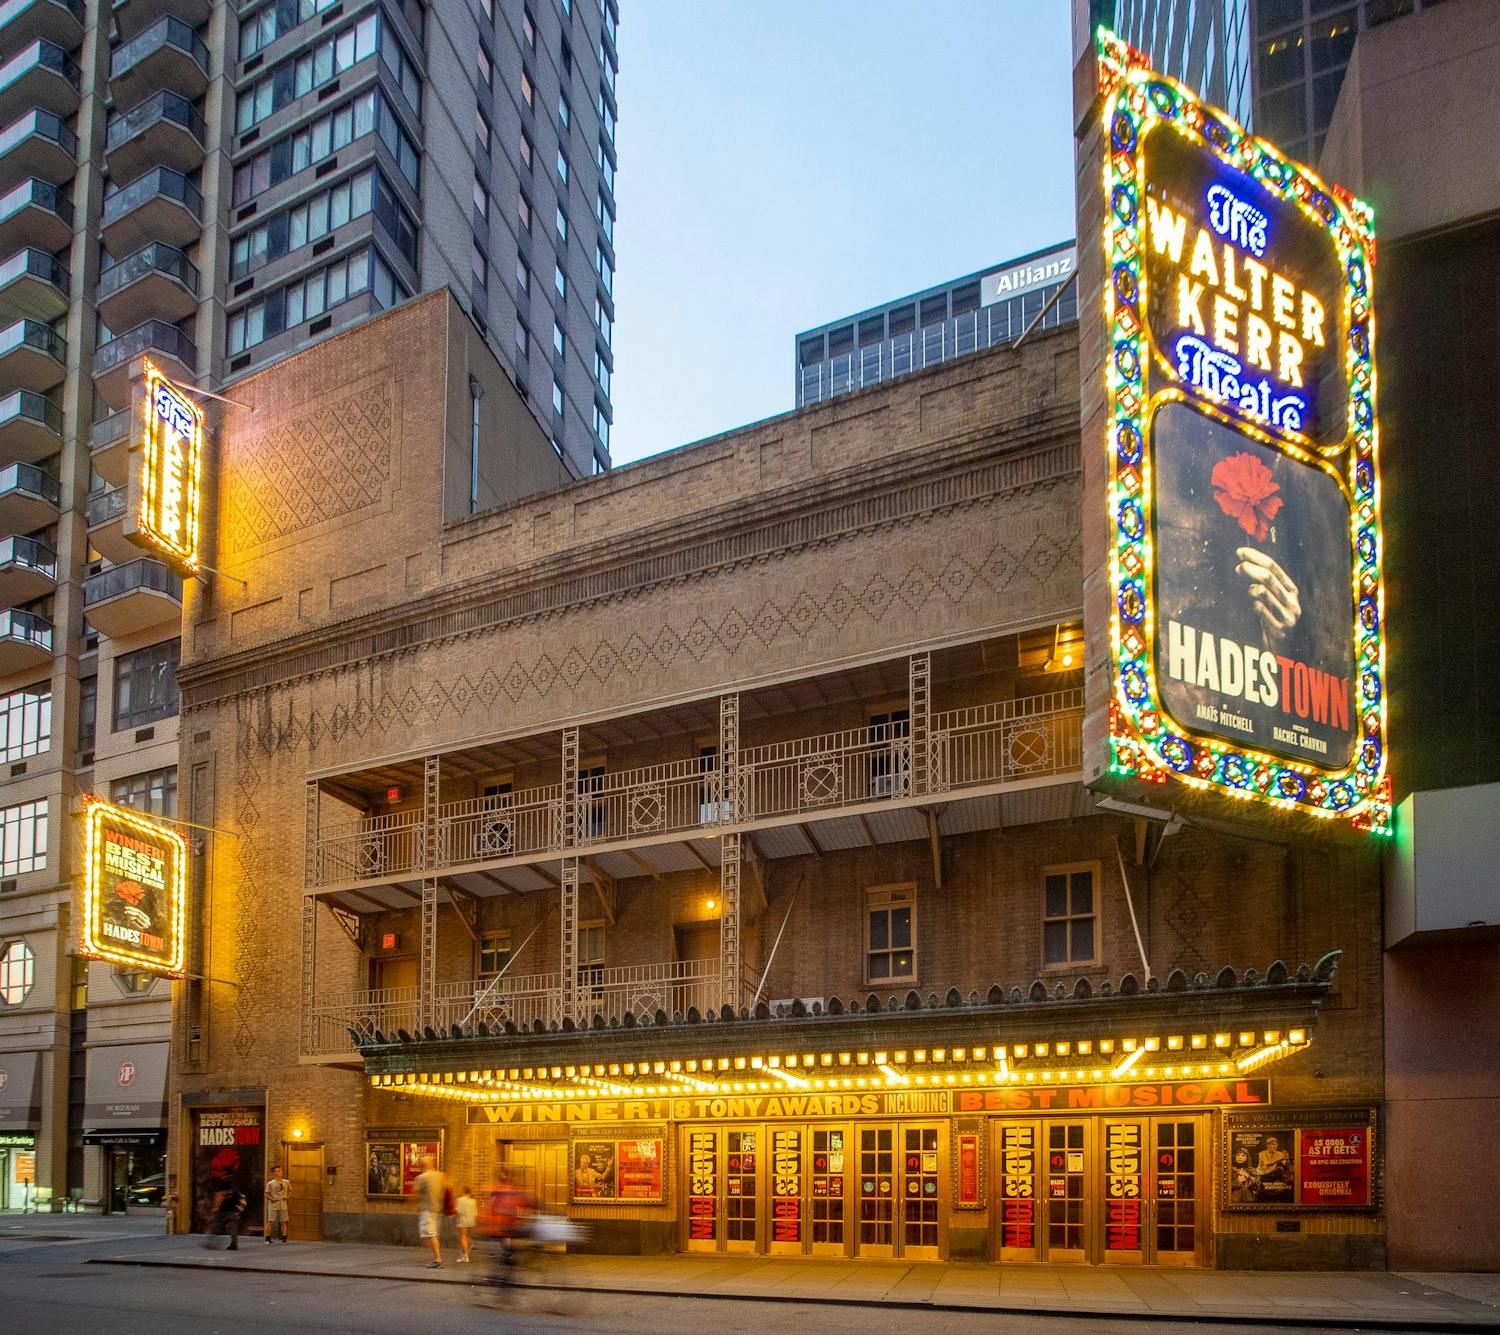 The Walter Kerr Theatre is pictured during its run of “Hadestown.”